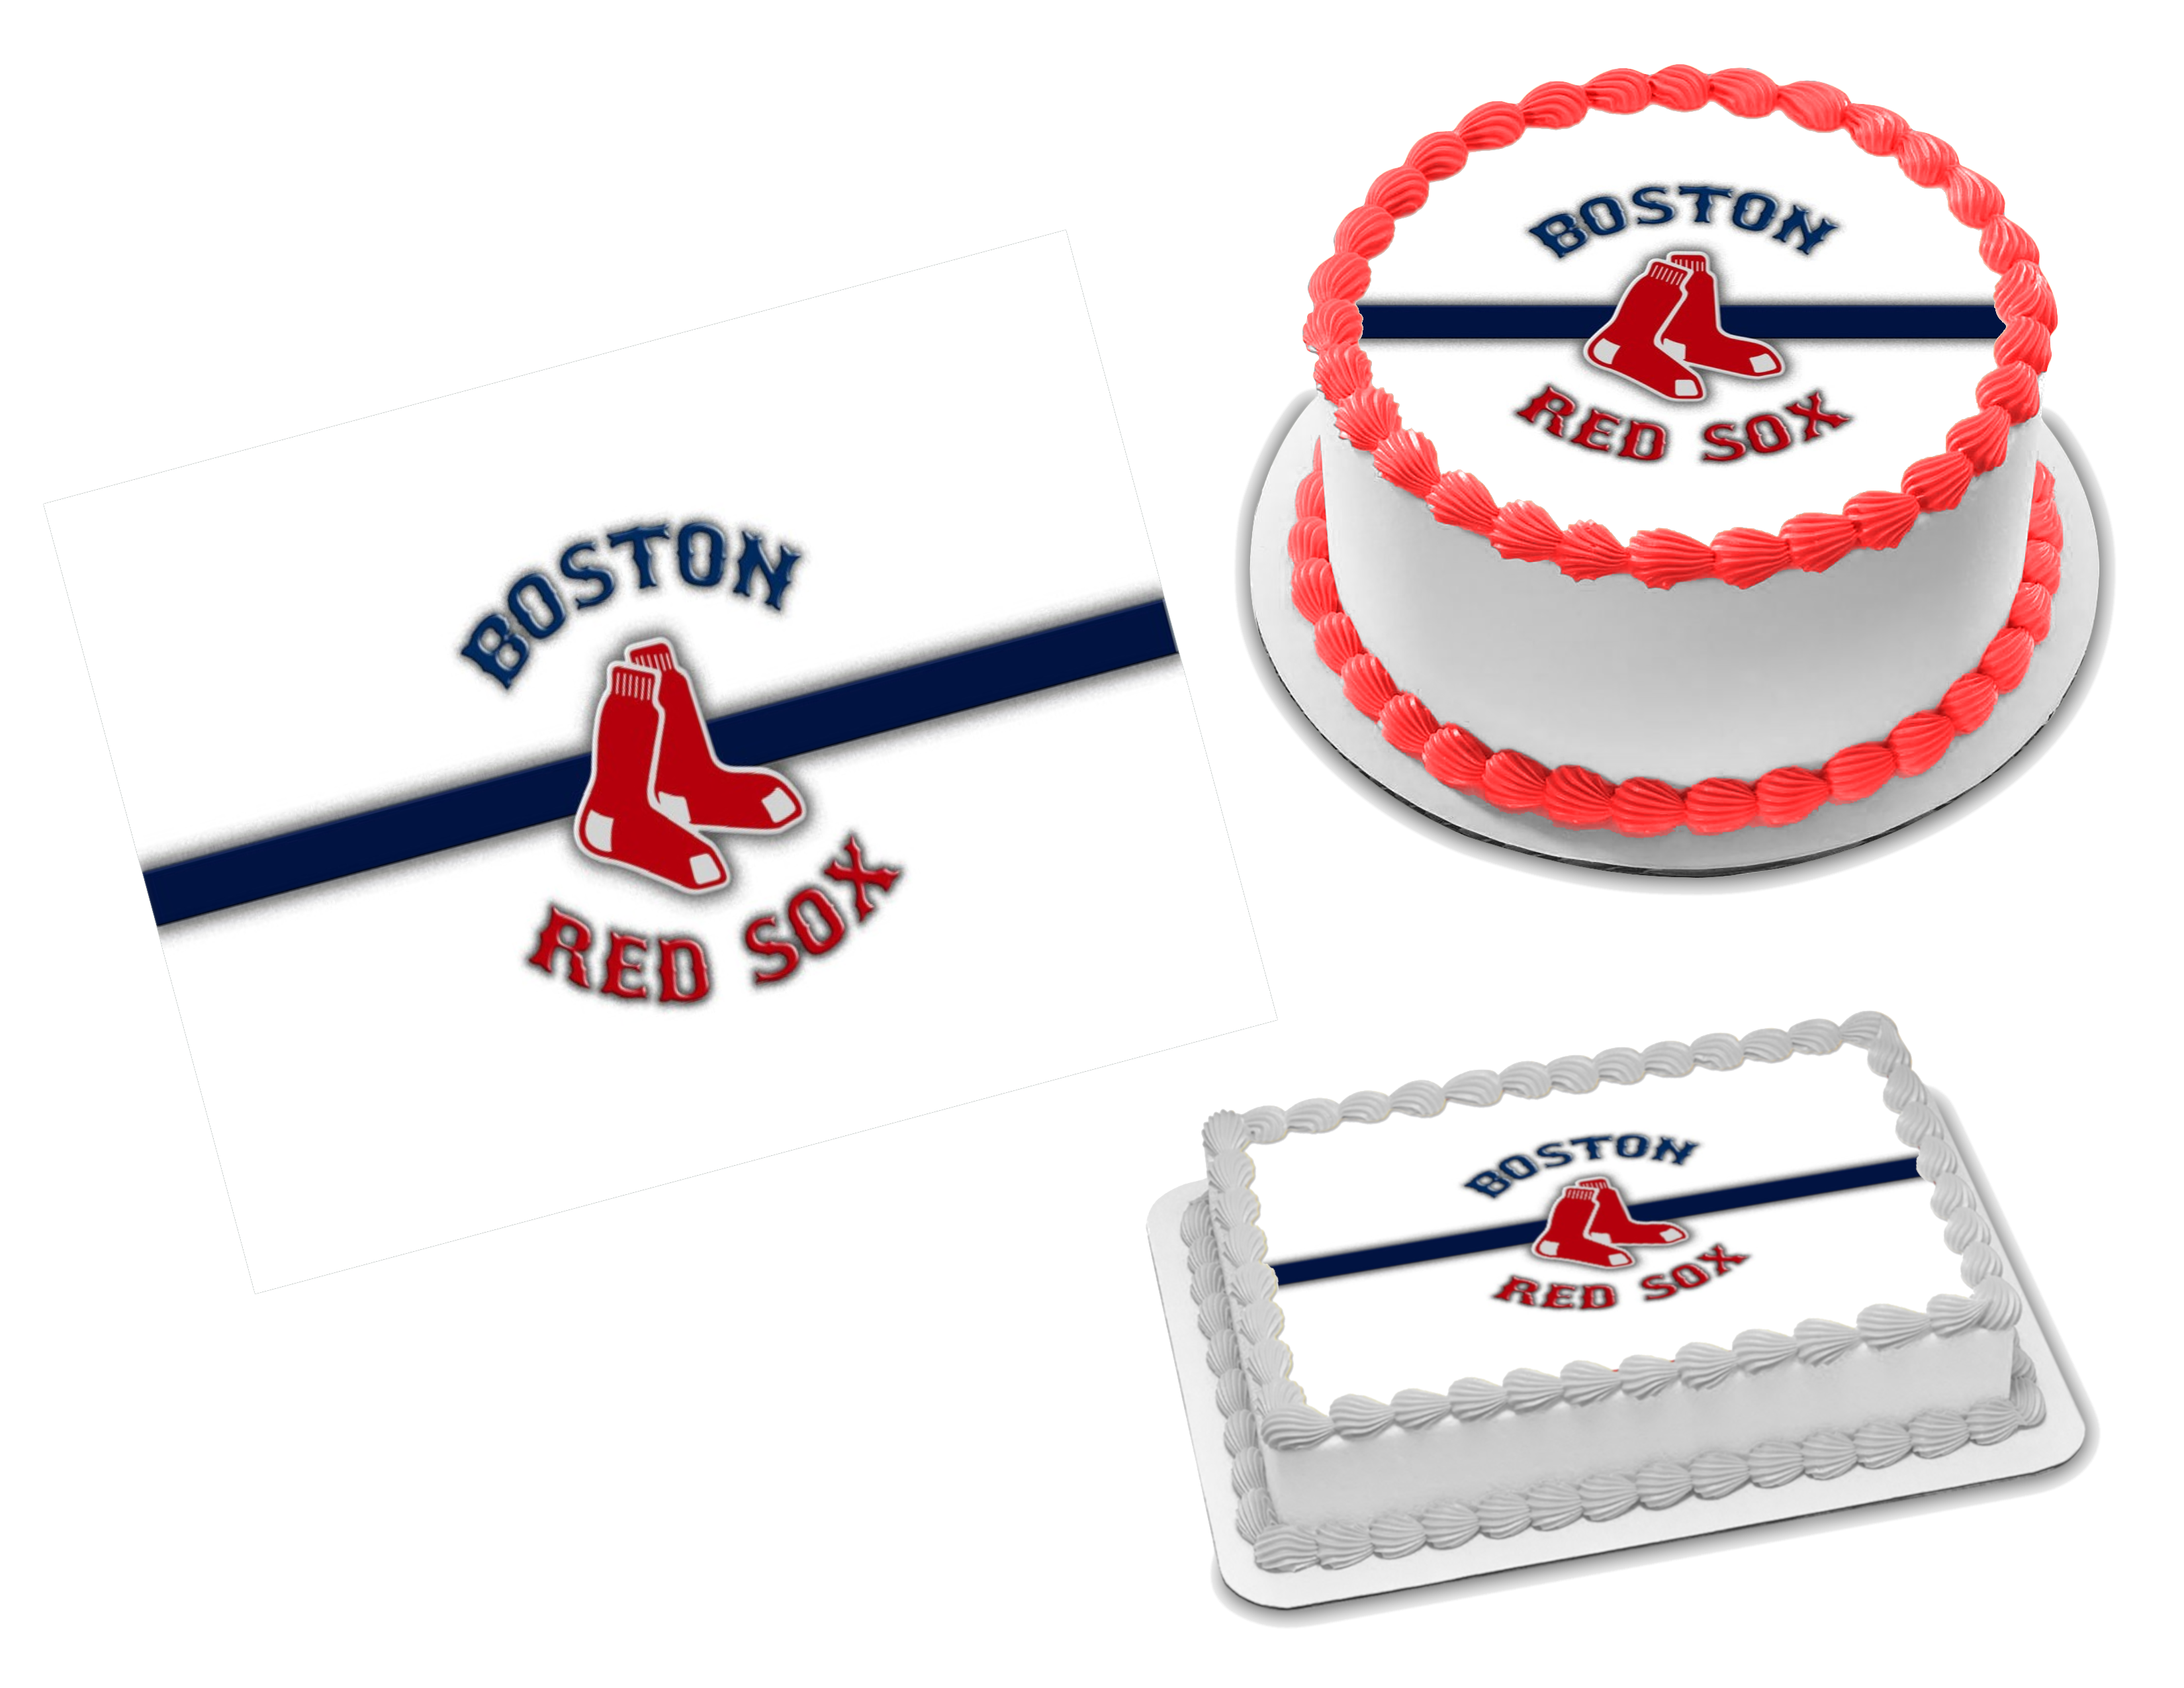 Red Sox Cake 